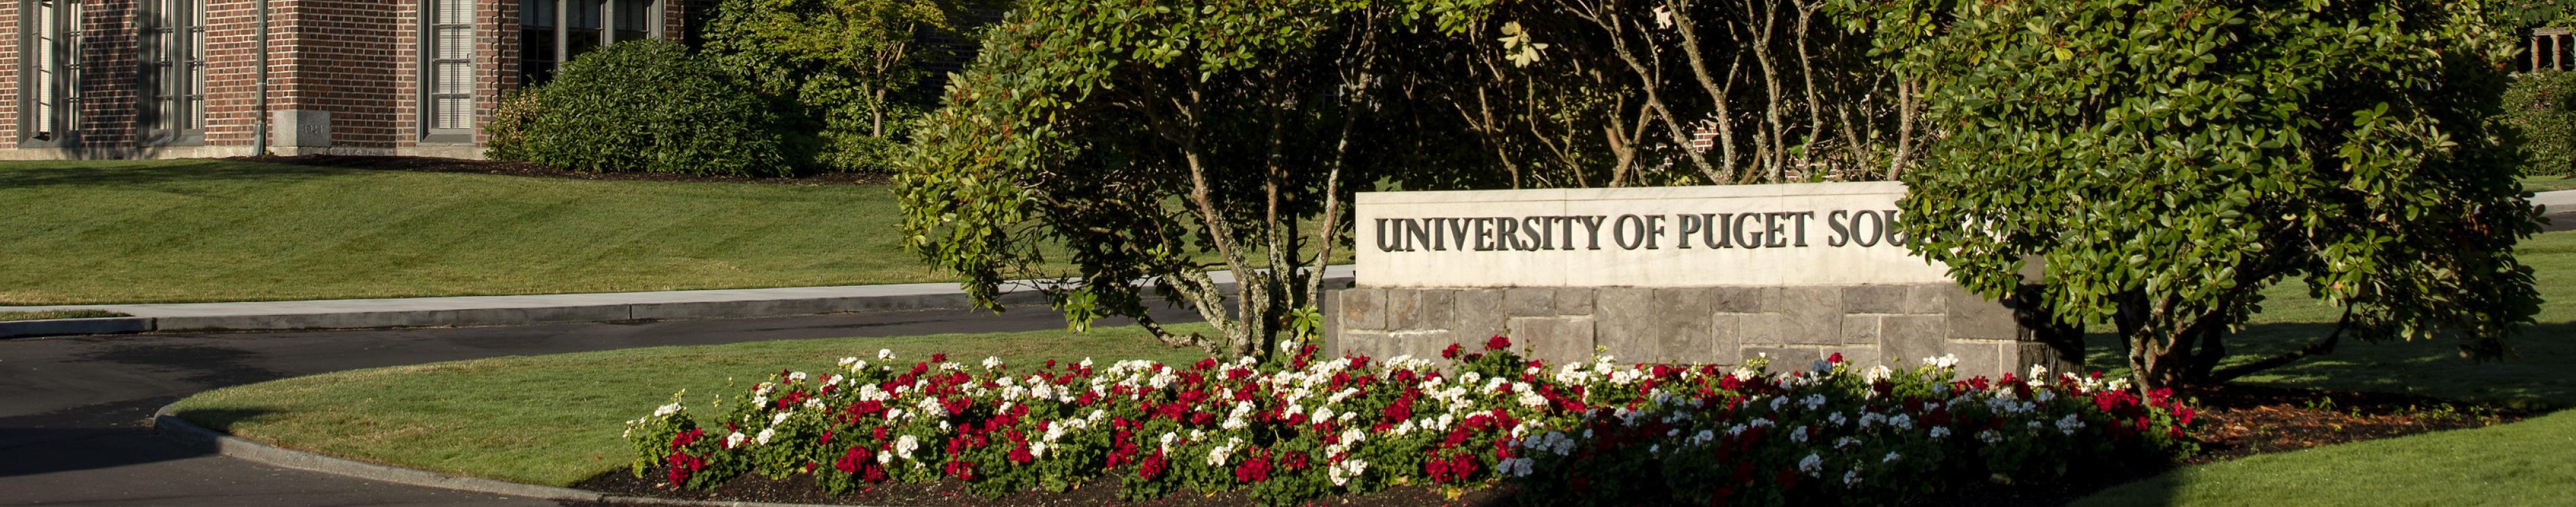 Howarth Hall and University of Puget Sound sign.